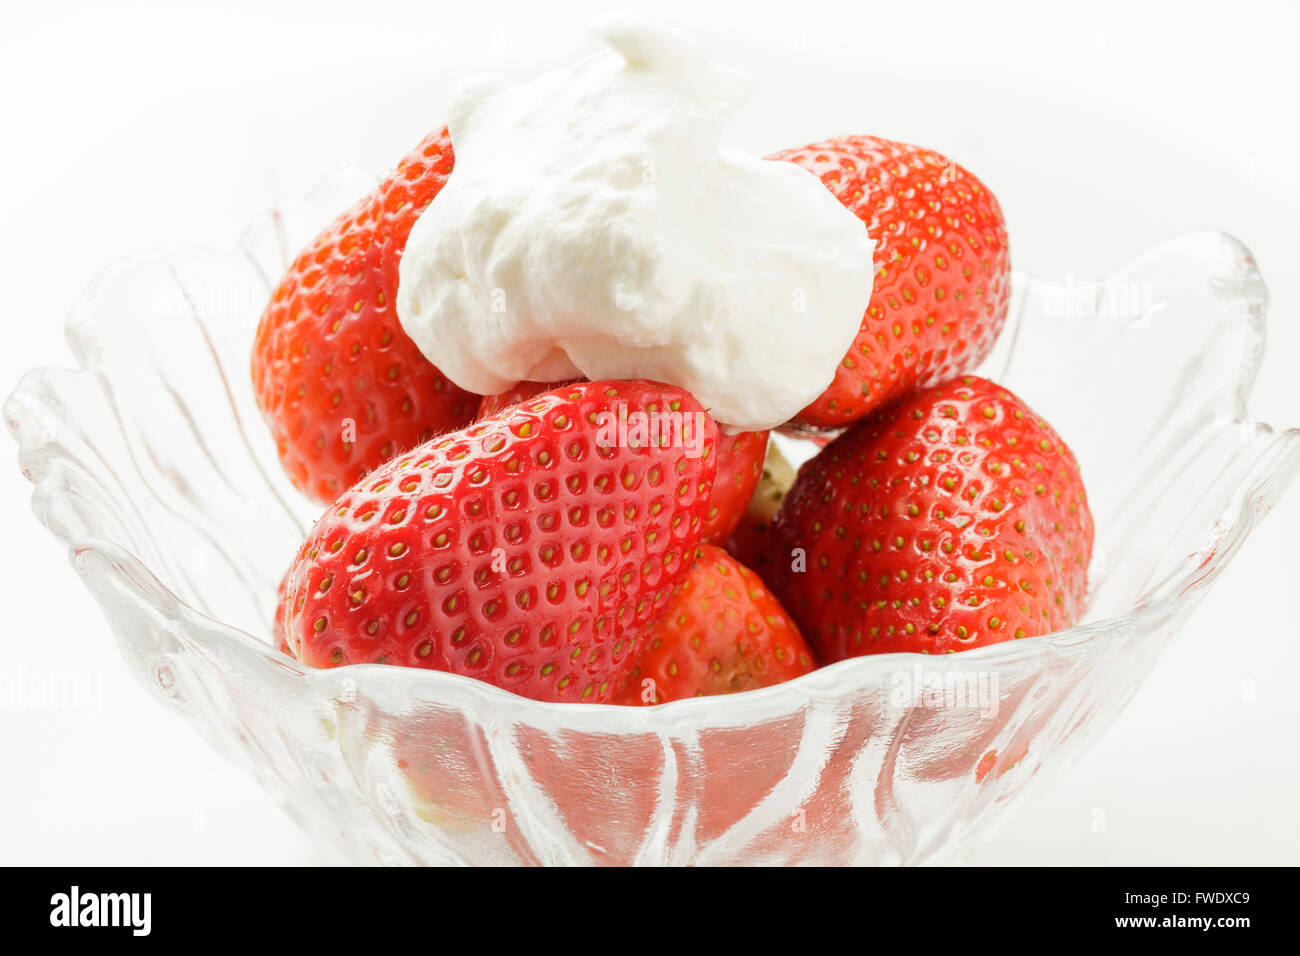 Fresh strawberries and cream in a glass bowl Stock Photo